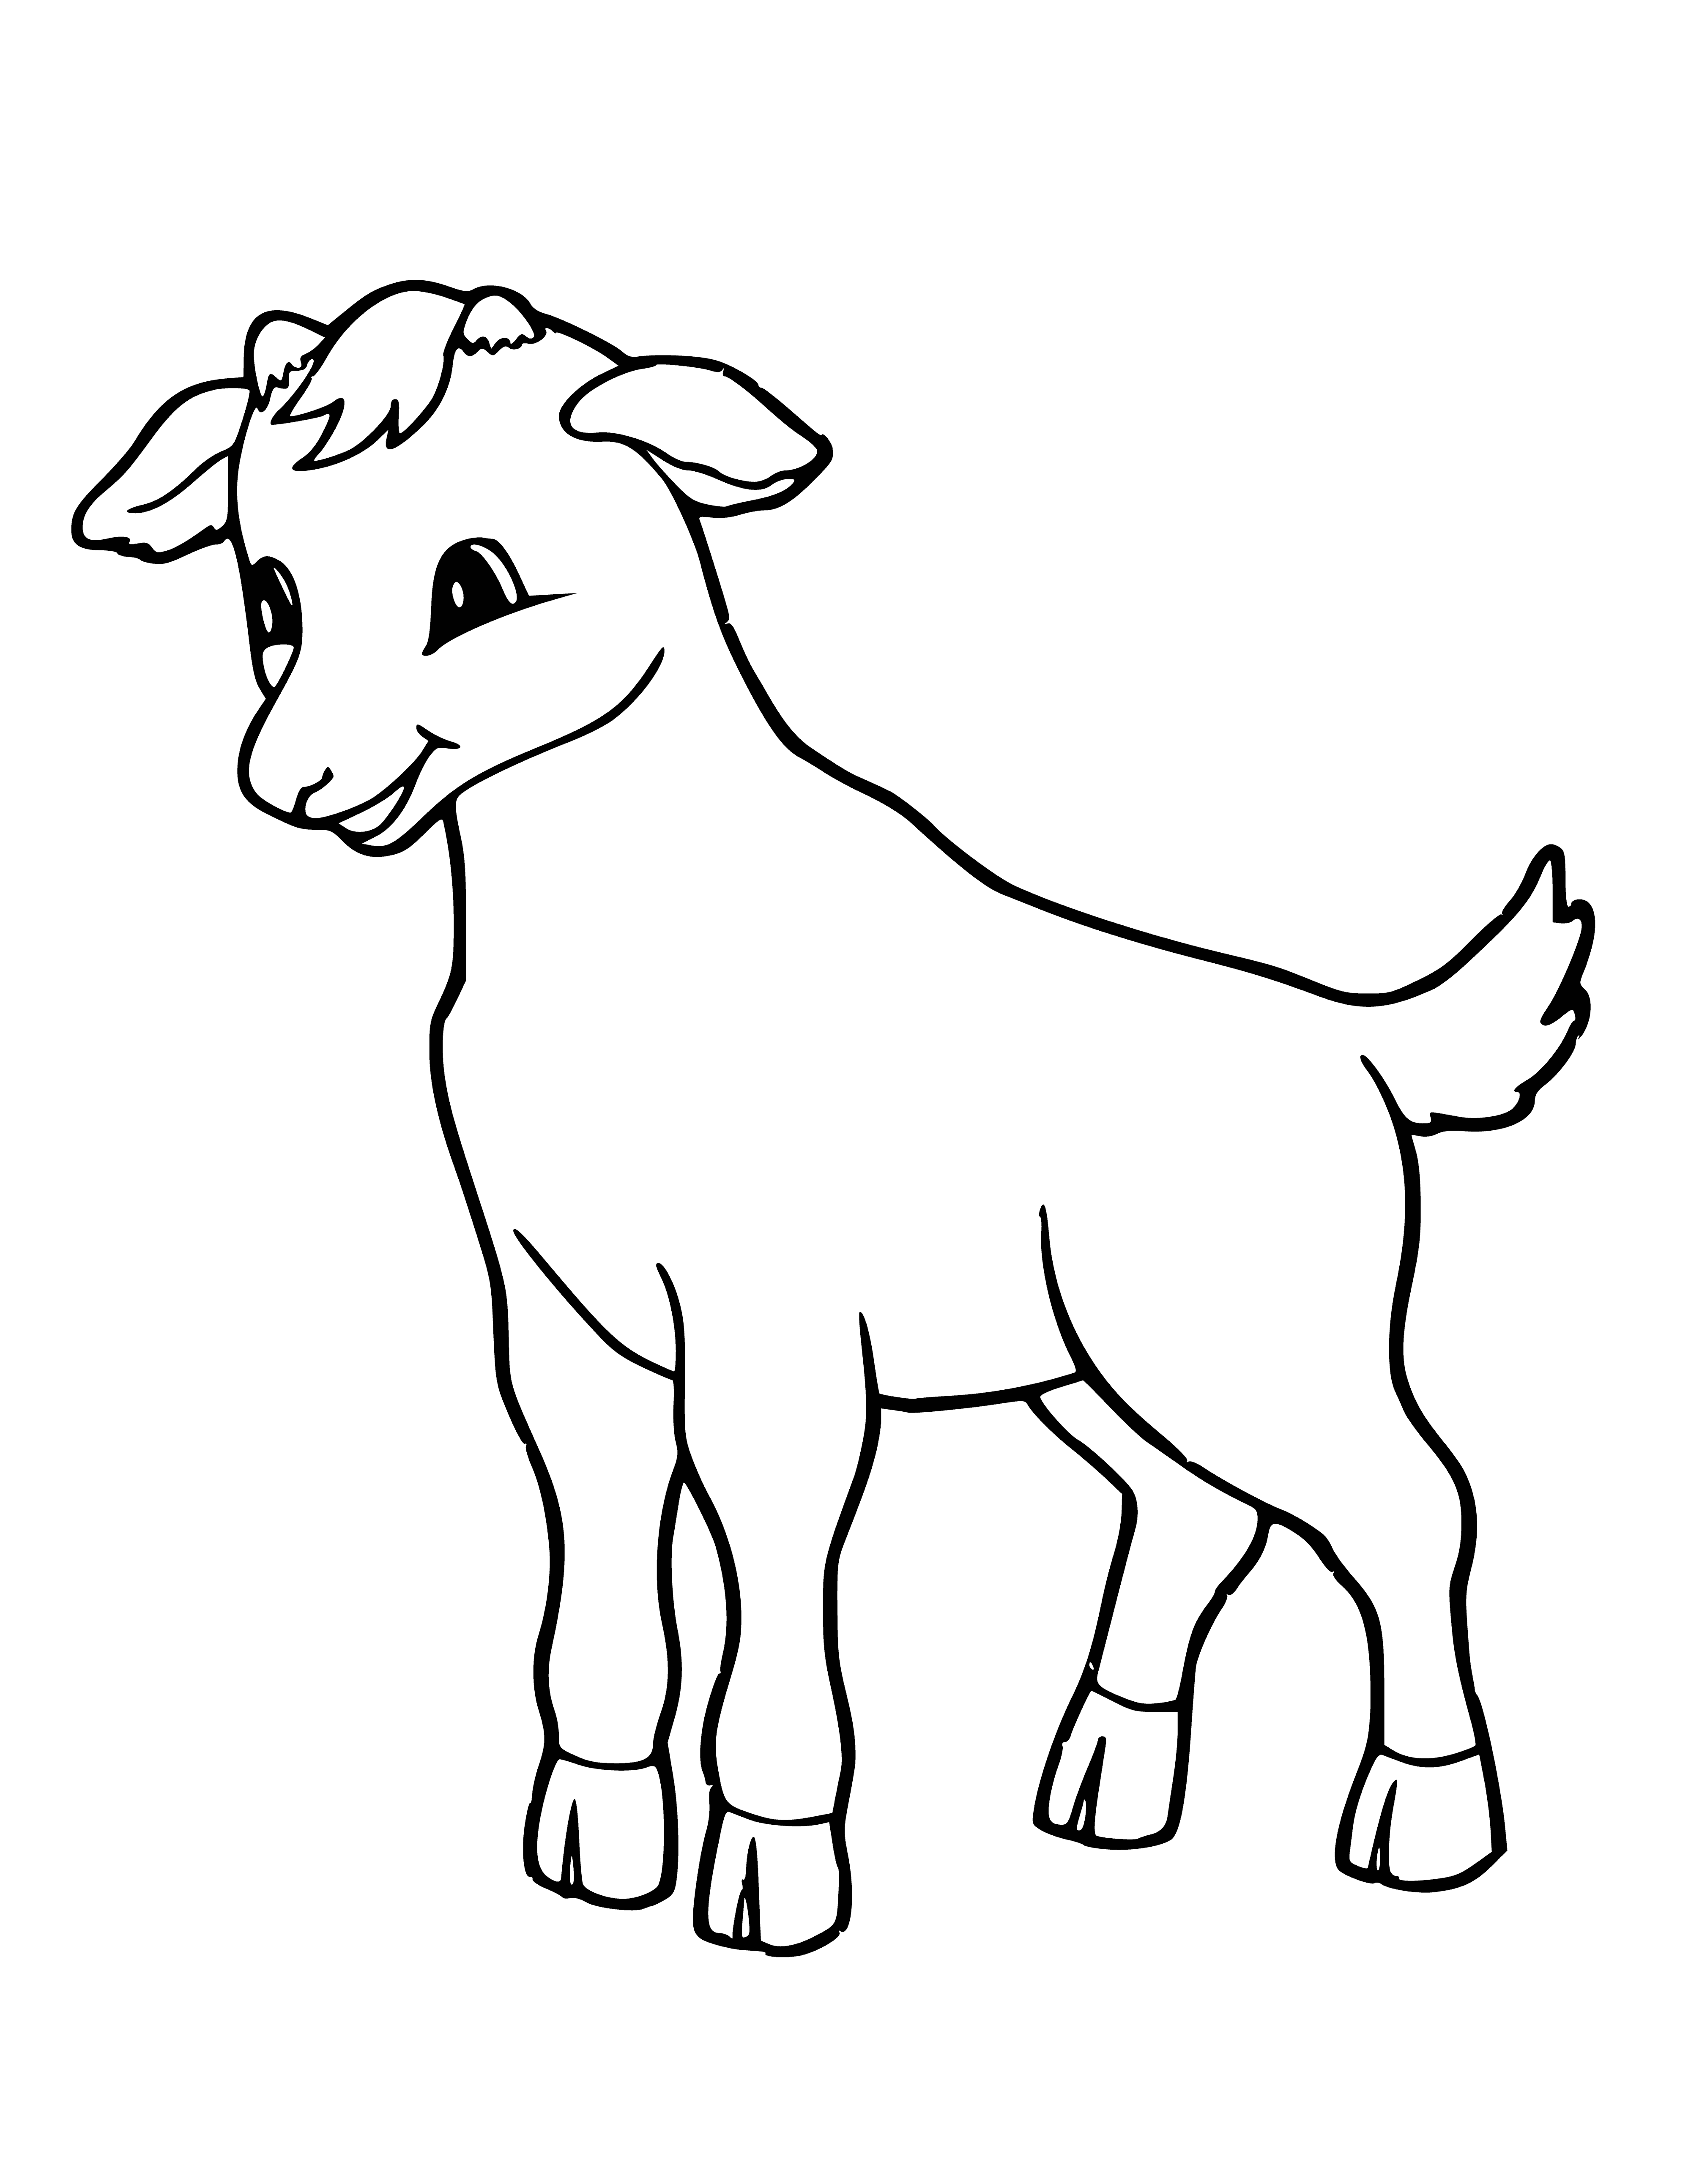 coloring page: Two animals on a hill: a white sheep and brown goat with horns. #coloringbook #animal #sheep #goat